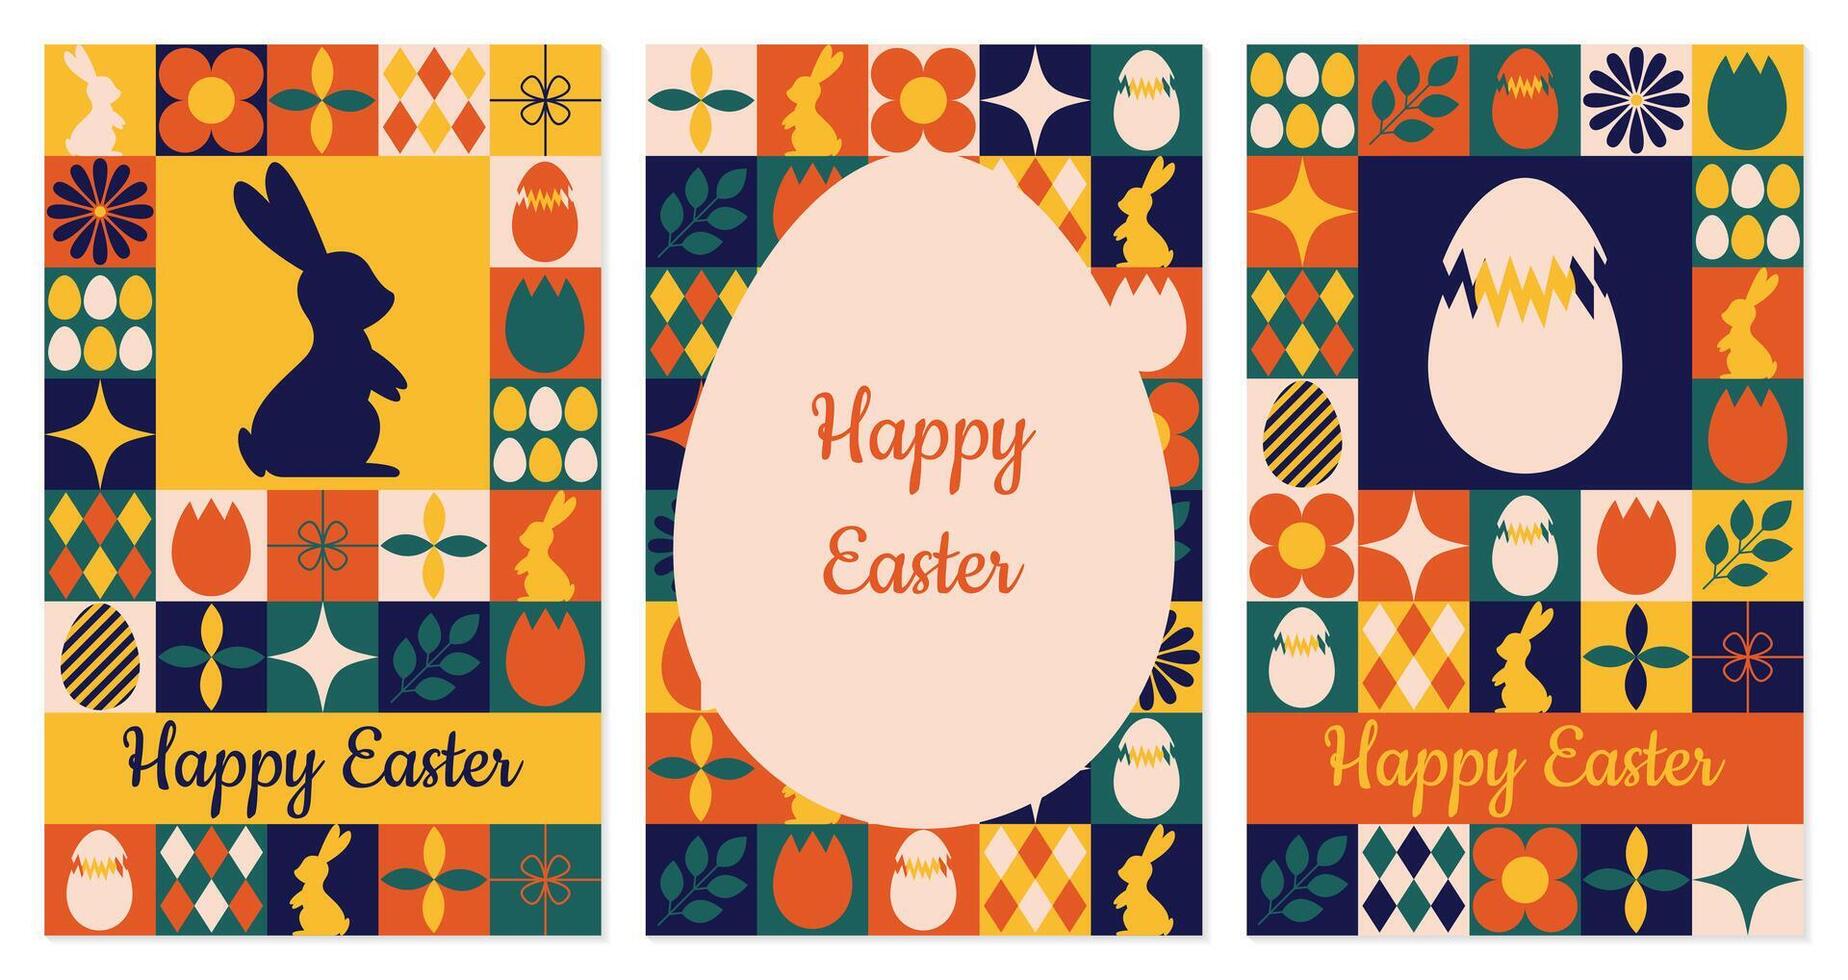 Set of Easter greeting cards, posters, banners. Collection of holiday icons. Website decoration, graphic elements. illustration vector